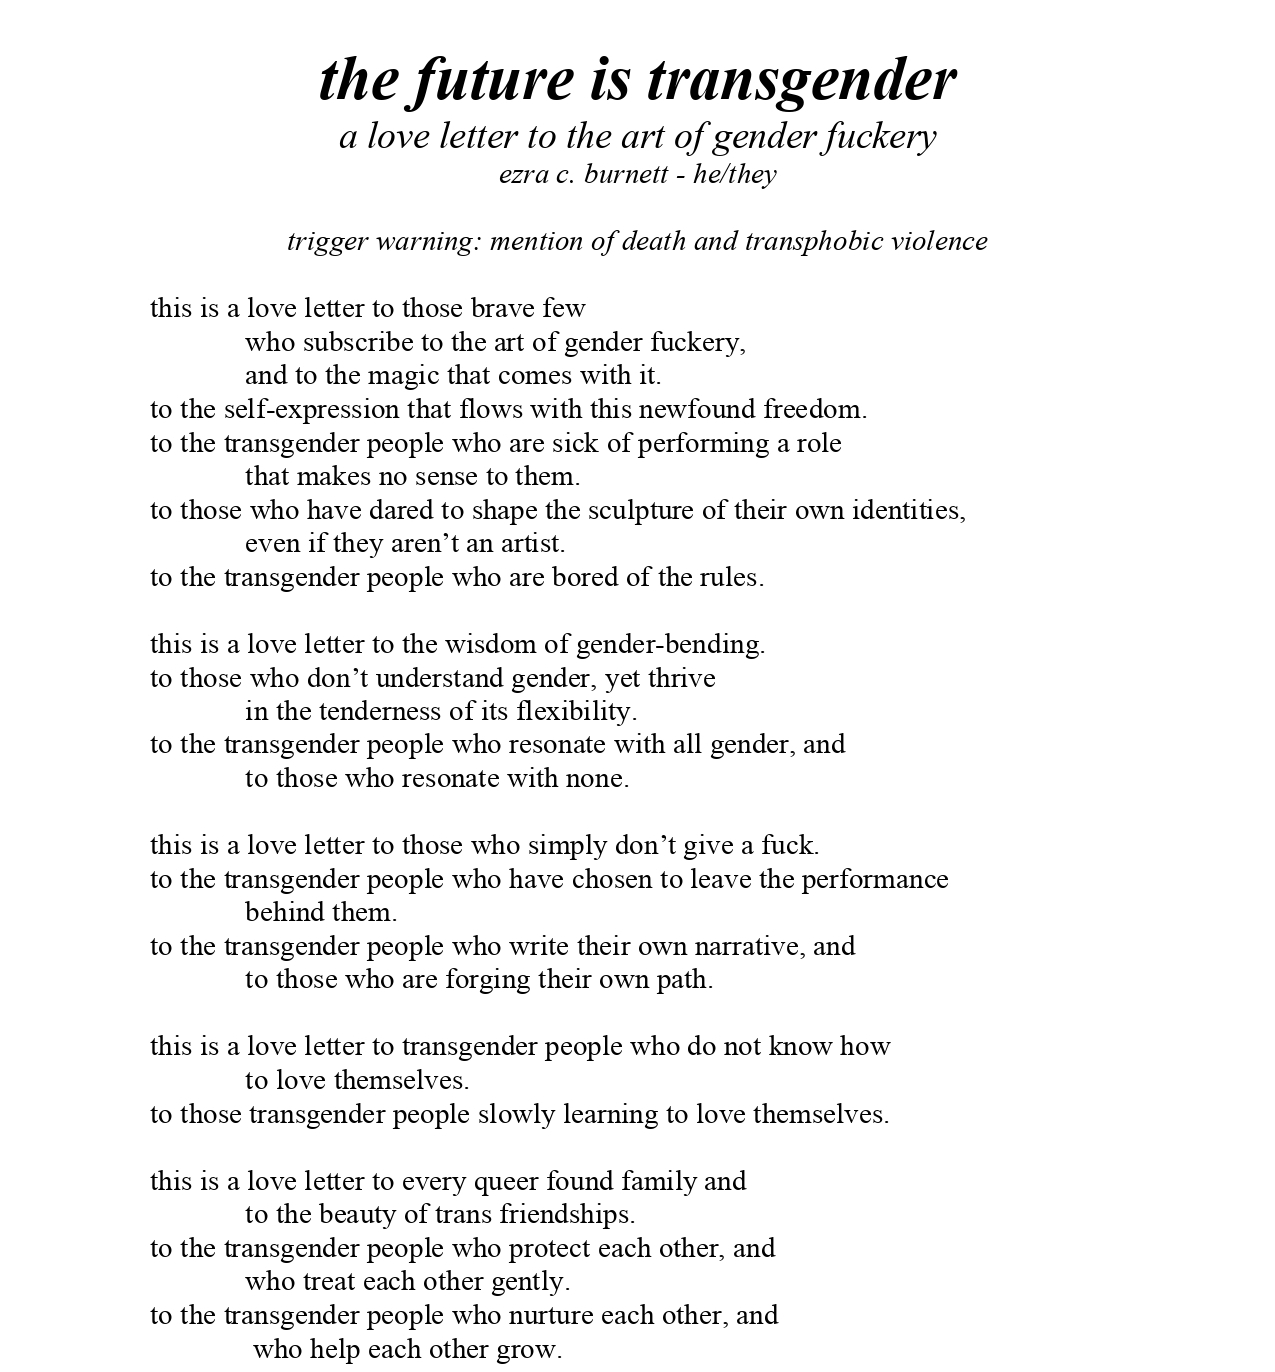 the future is transgender a love letter to the art of gender fuckery ezra c. burnett - he/they trigger warning: mention of death and transphobic violence this is a love letter to those brave few who subscribe to the art of gender fuckery, and to the magic that comes with it. to the self-expression that flows with this newfound freedom. to the transgender people who are sick of performing a role that makes no sense to them. to those who have dared to shape the sculpture of their own identities, even if they aren’t an artist. to the transgender people who are bored of the rules. this is a love letter to the wisdom of gender-bending. to those who don’t understand gender, yet thrive in the tenderness of its flexibility. to the transgender people who resonate with all gender, and to those who resonate with none. this is a love letter to those who simply don’t give a fuck. to the transgender people who have chosen to leave the performance behind them. to the transgender people who write their own narrative, and to those who are forging their own path. this is a love letter to transgender people who do not know how to love themselves. to those transgender people slowly learning to love themselves. this is a love letter to every queer found family and to the beauty of trans friendships. to the transgender people who protect each other, and who treat each other gently. to the transgender people who nurture each other, and who help each other grow.